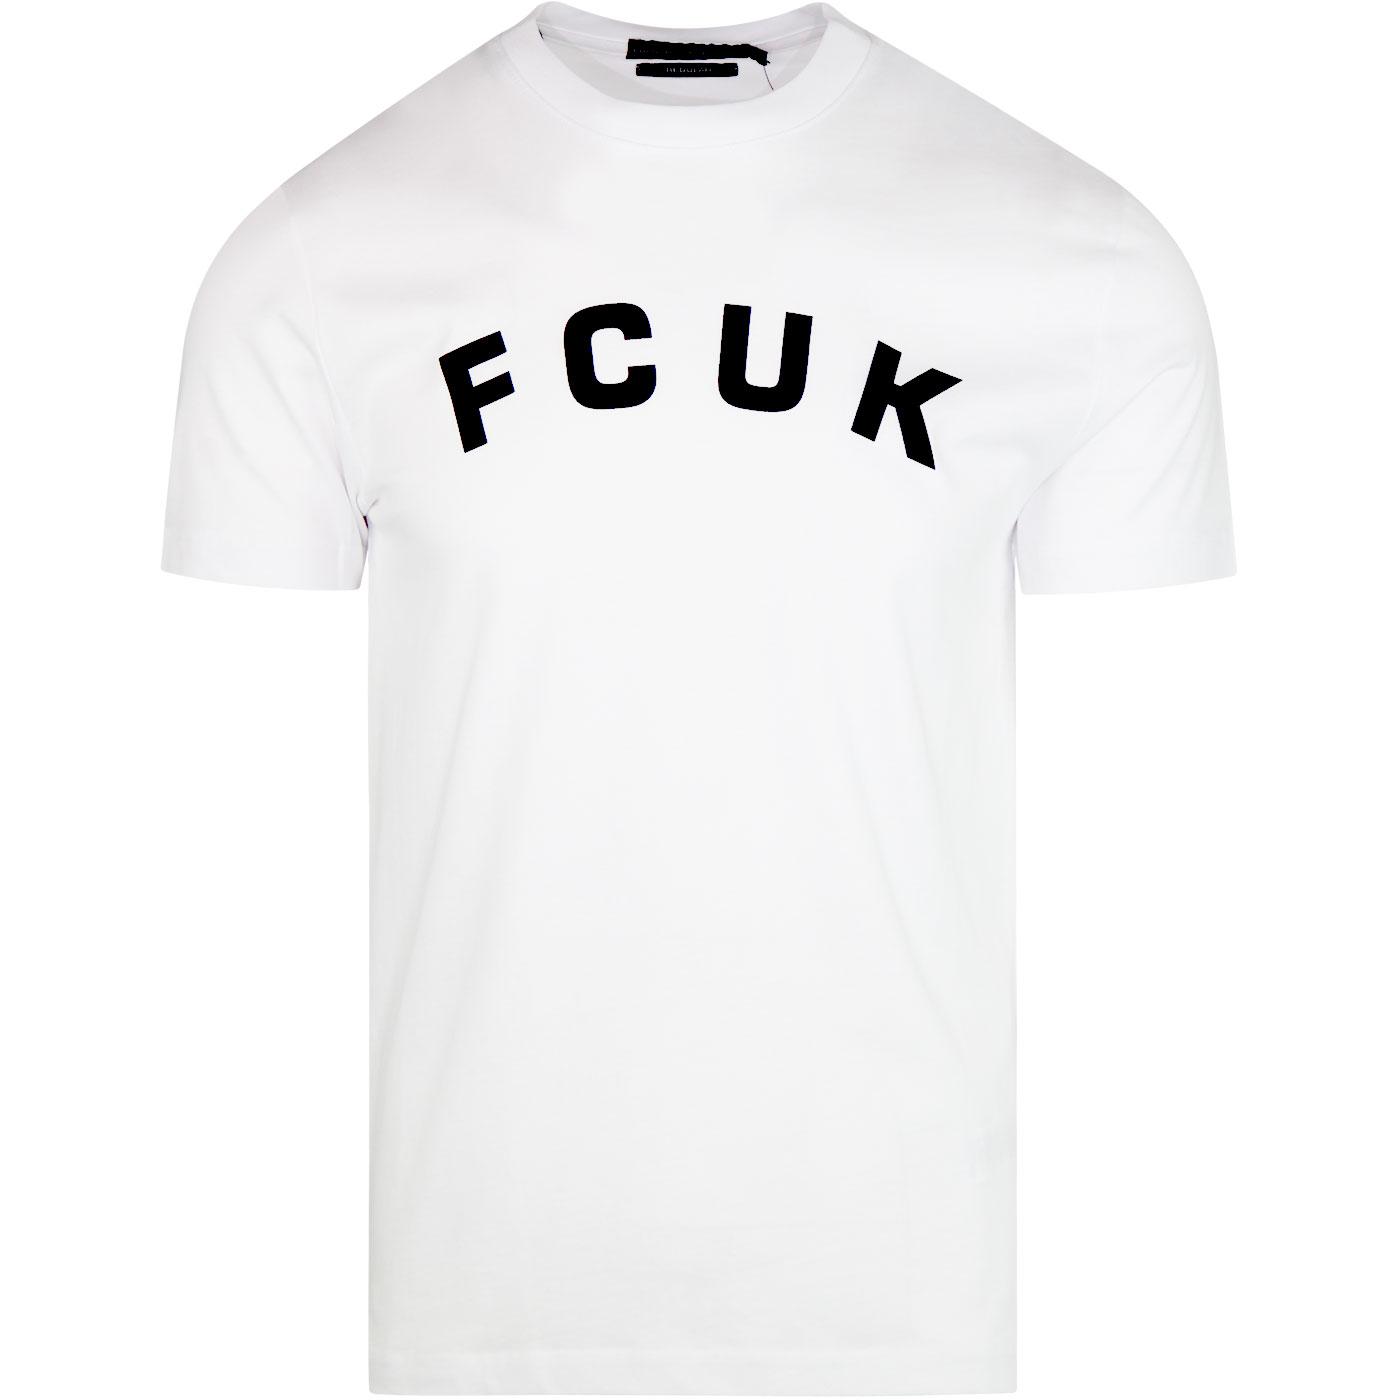 FRENCH CONNECTION Arched Crew Neck Retro FCUK Tee